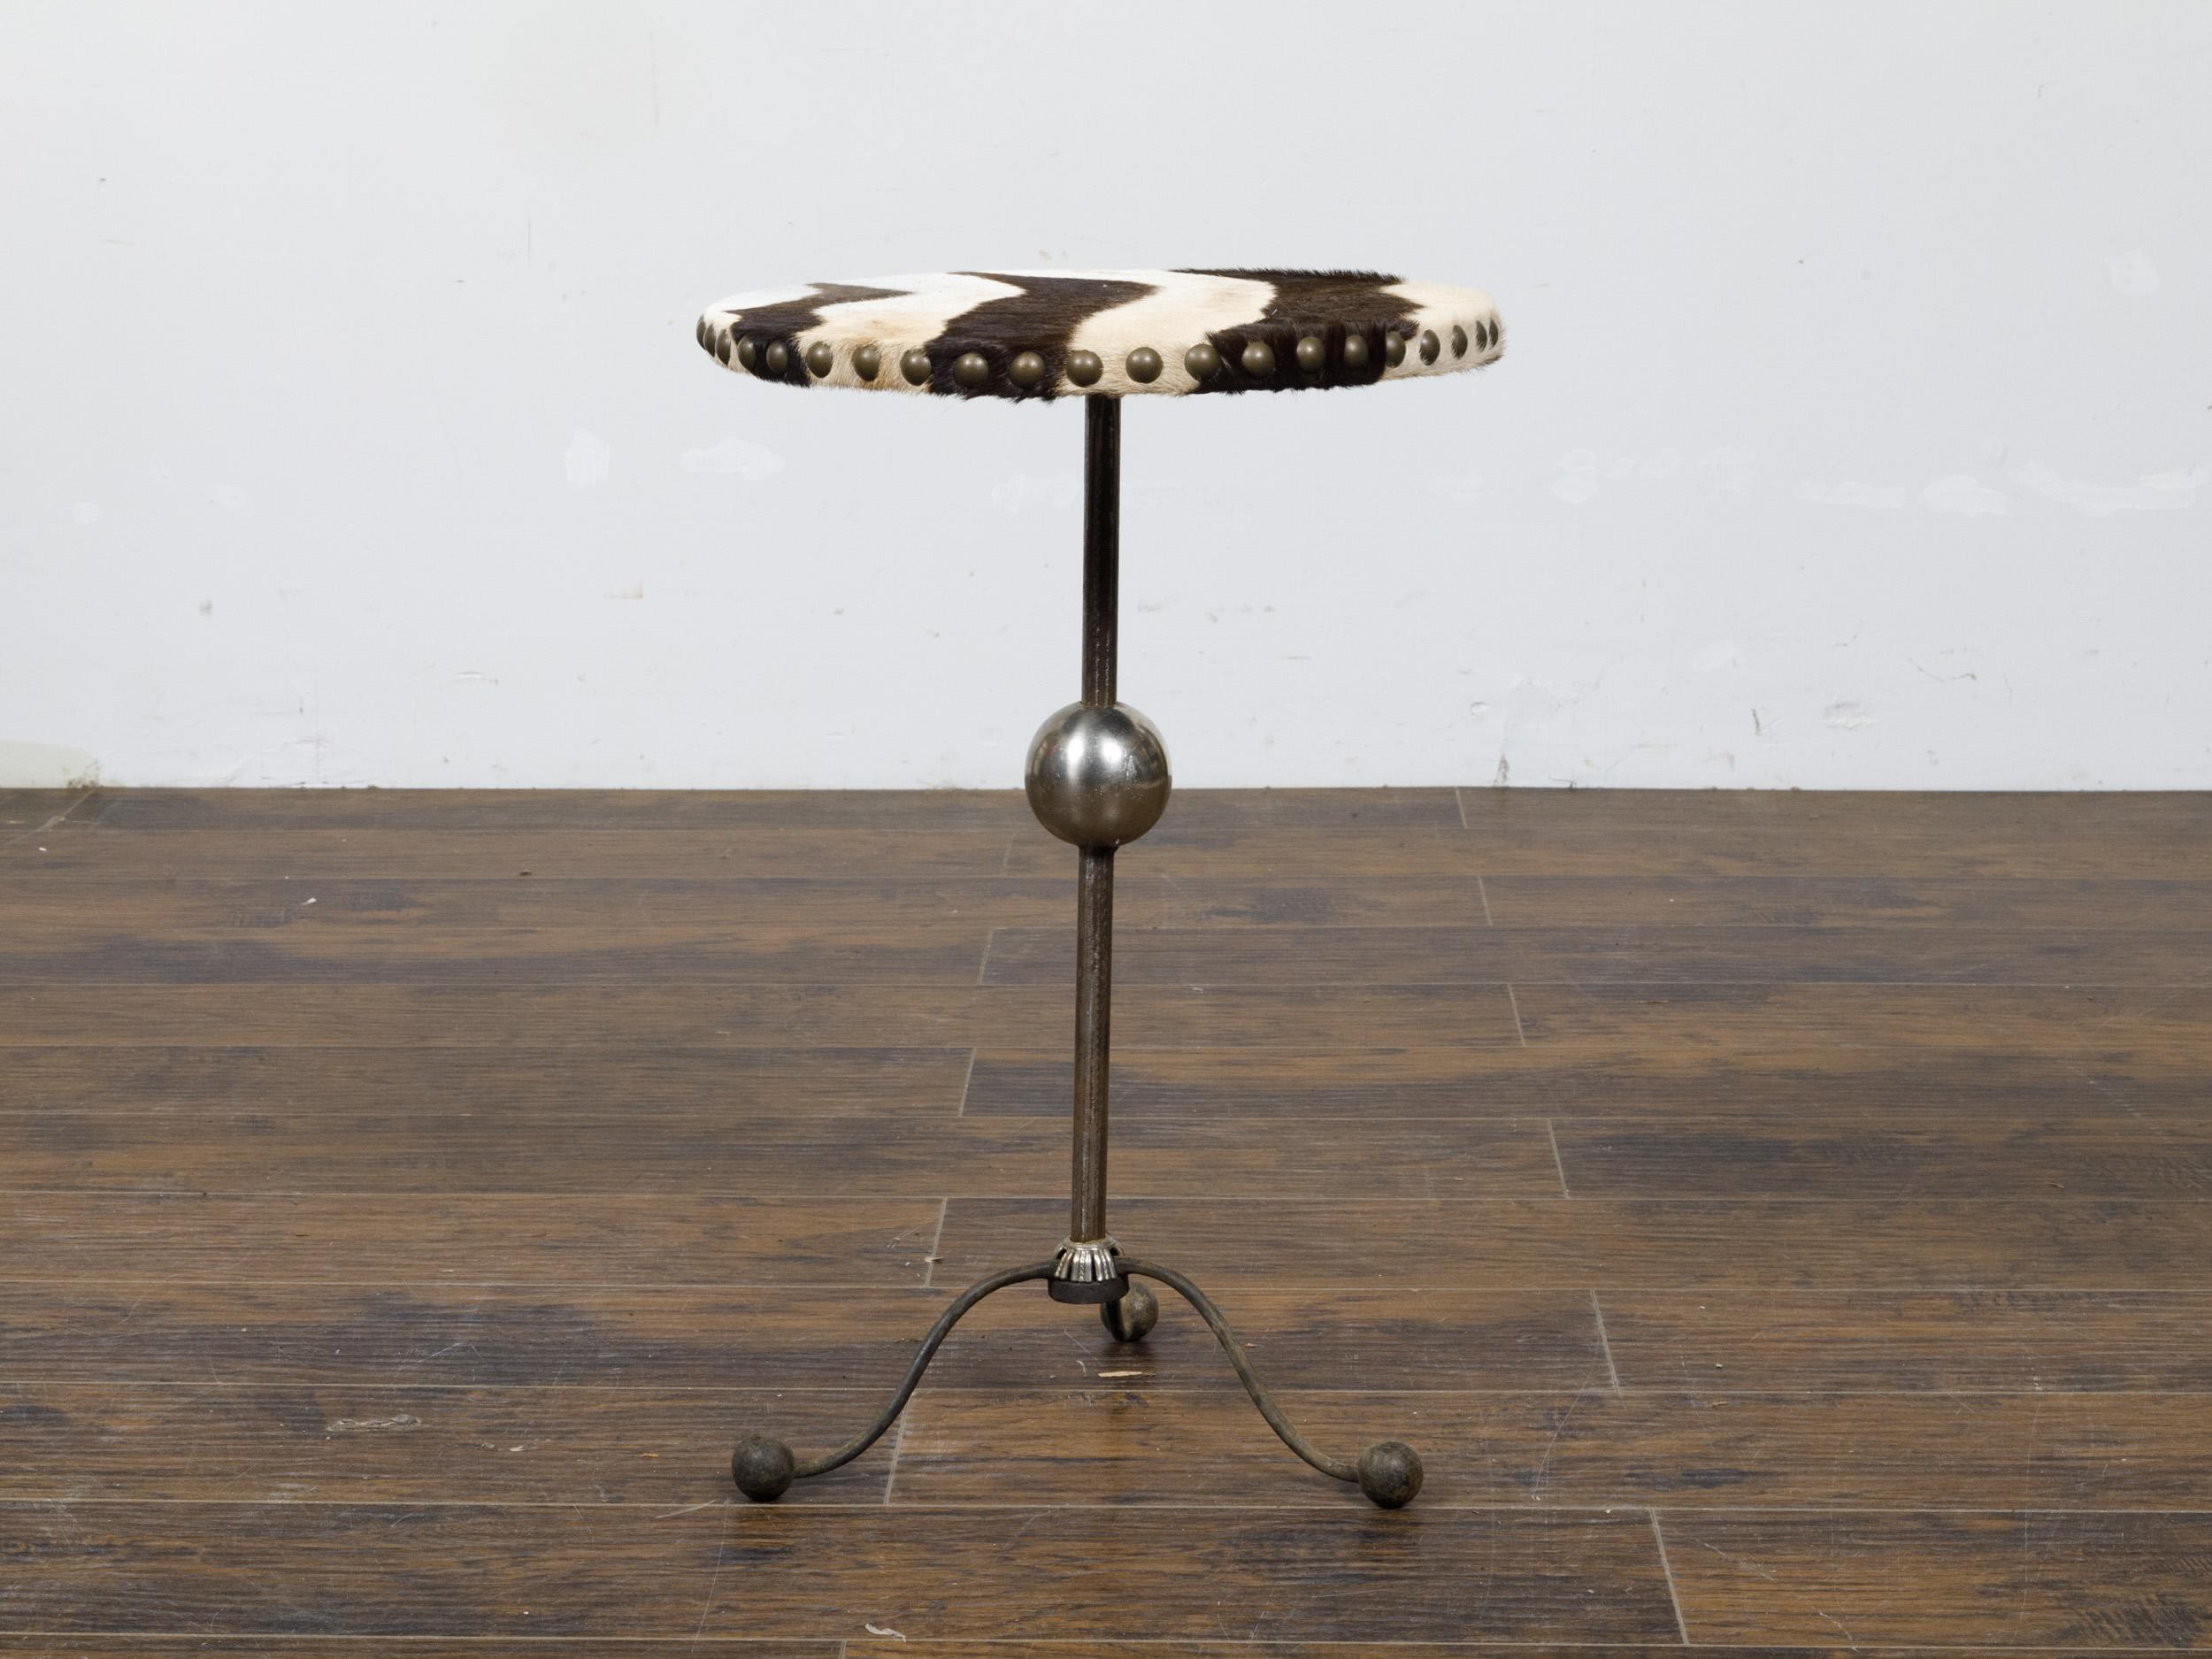 An English Art Deco steel guéridon side table with zebra hide upholstered top, sphere motif and scrolling tripod base. This striking English Art Deco steel guéridon side table, dating back to the Art Deco era, makes a bold statement with its zebra